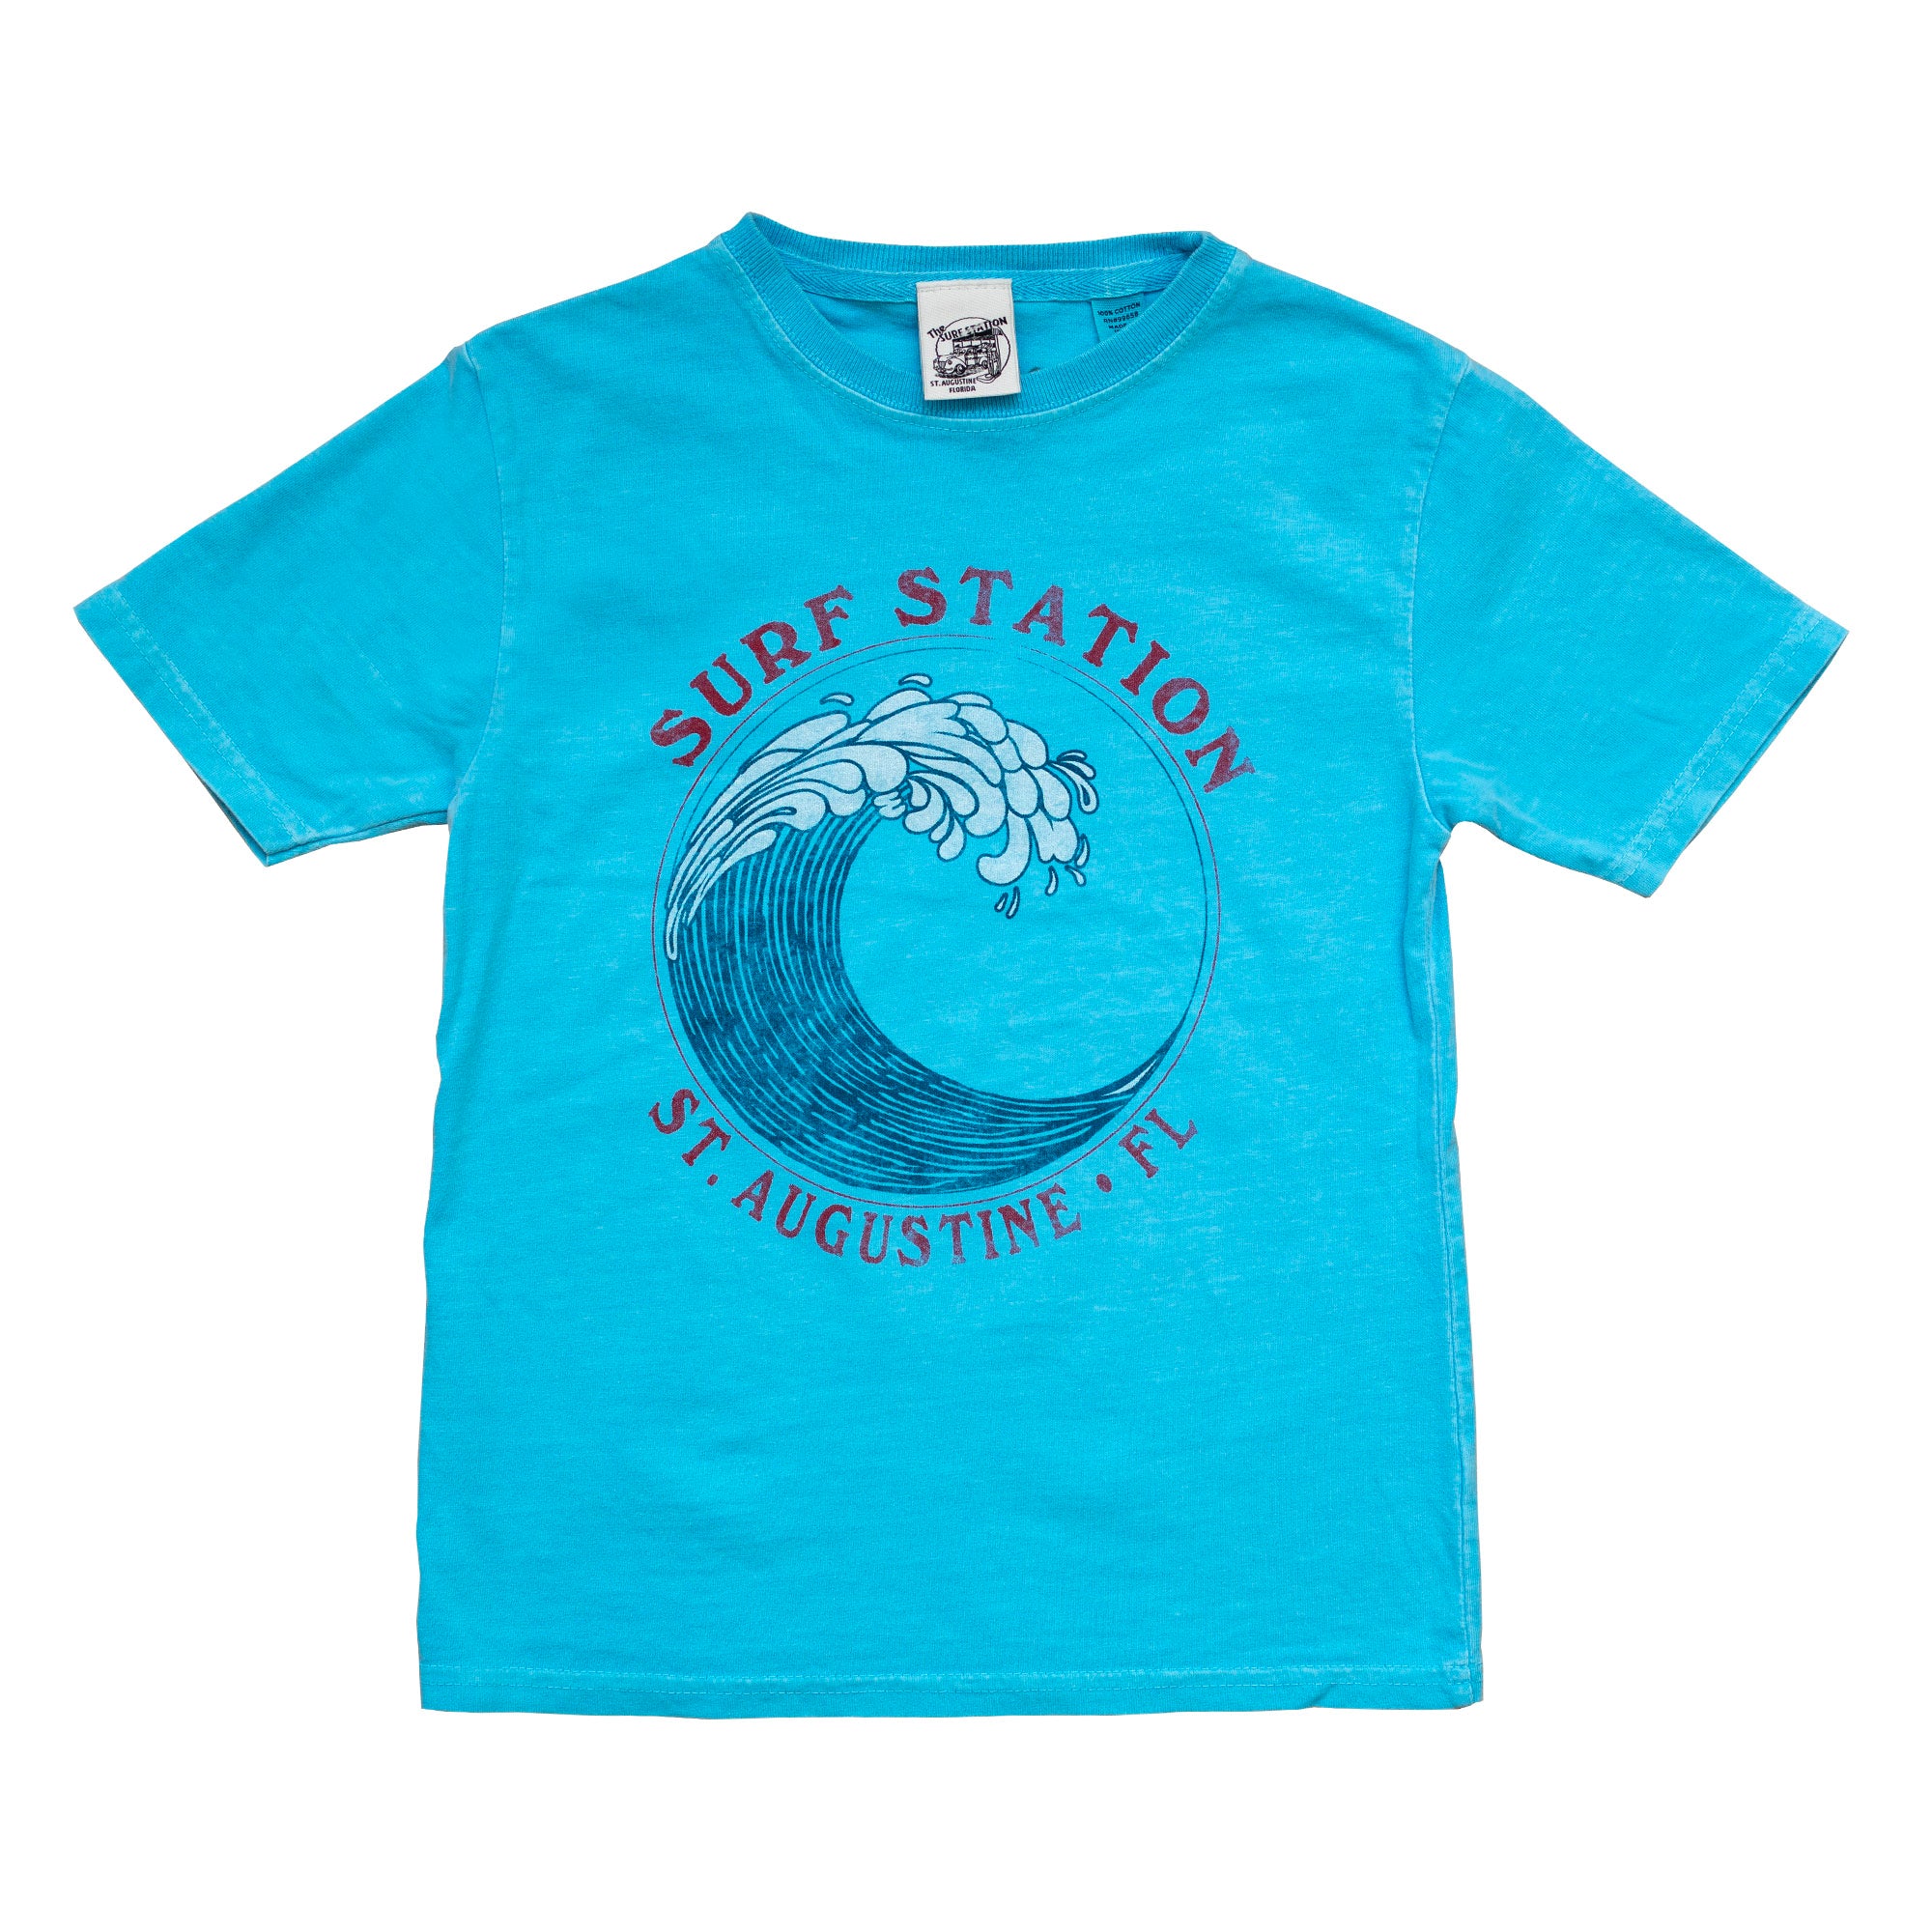 Surf Station Big Wave Youth Girl's S/S T-Shirt